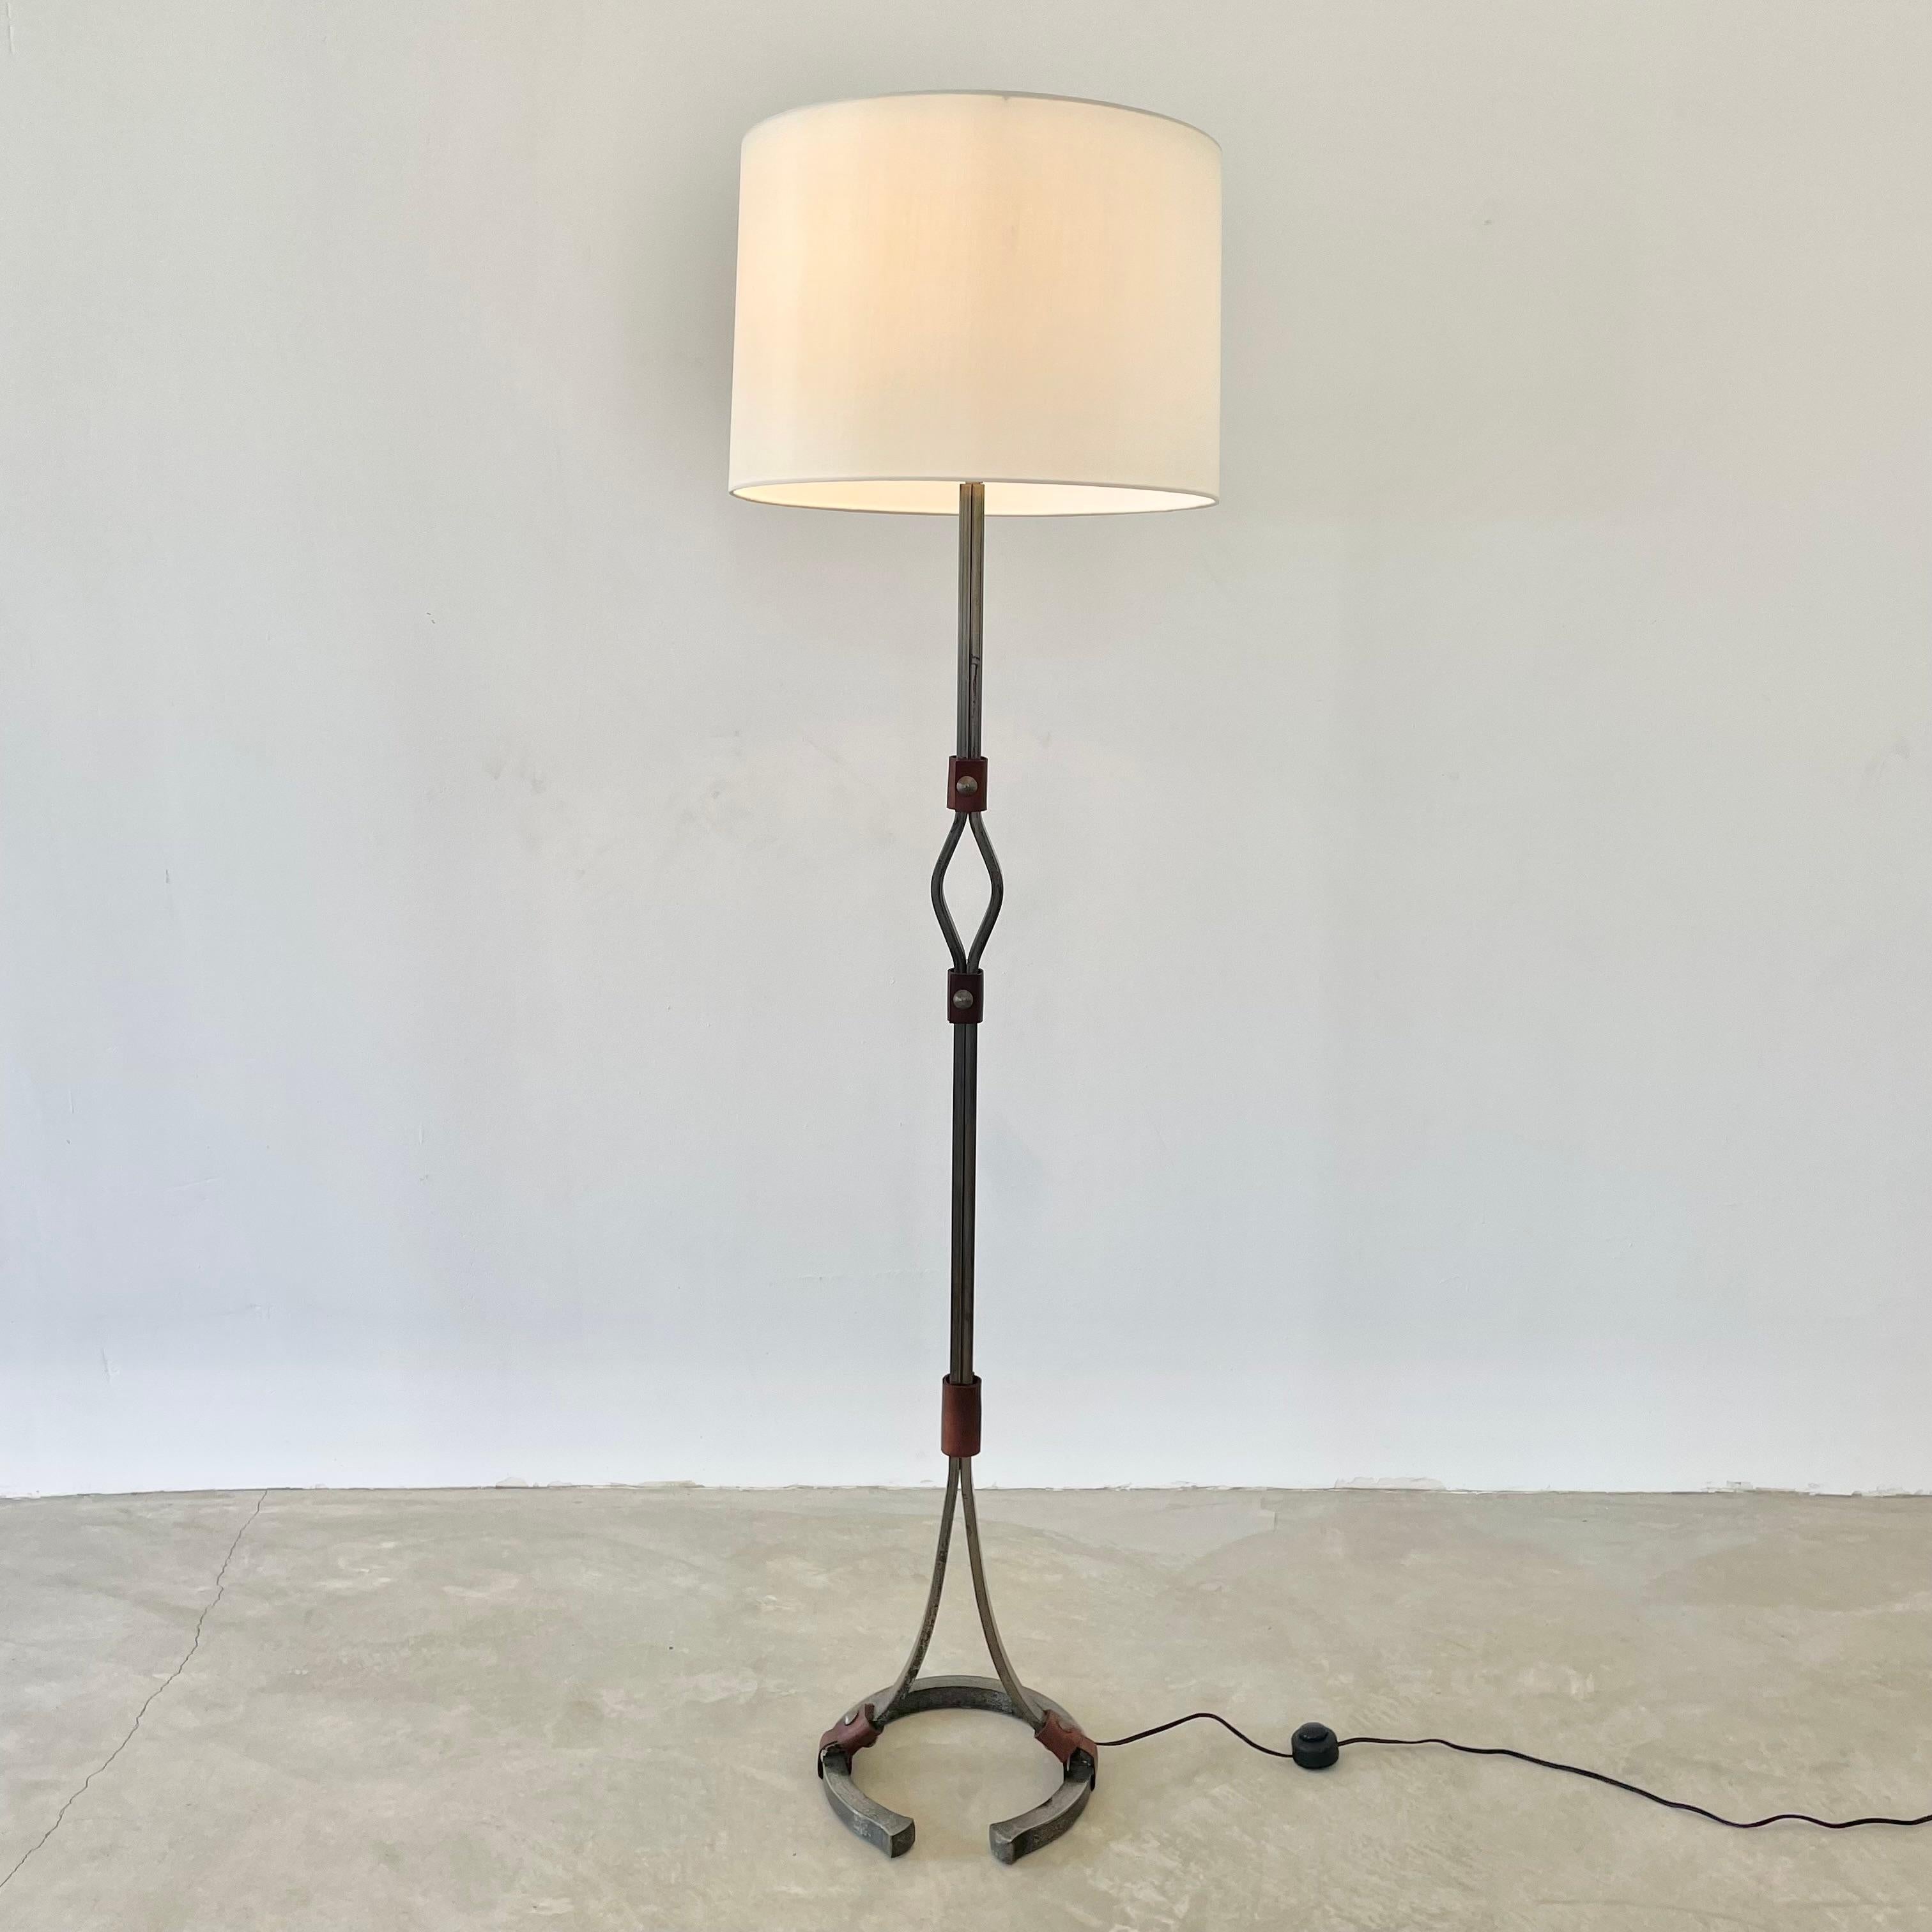 French Jacques Adnet Steel and Leather Floor Lamp, 1950s France For Sale